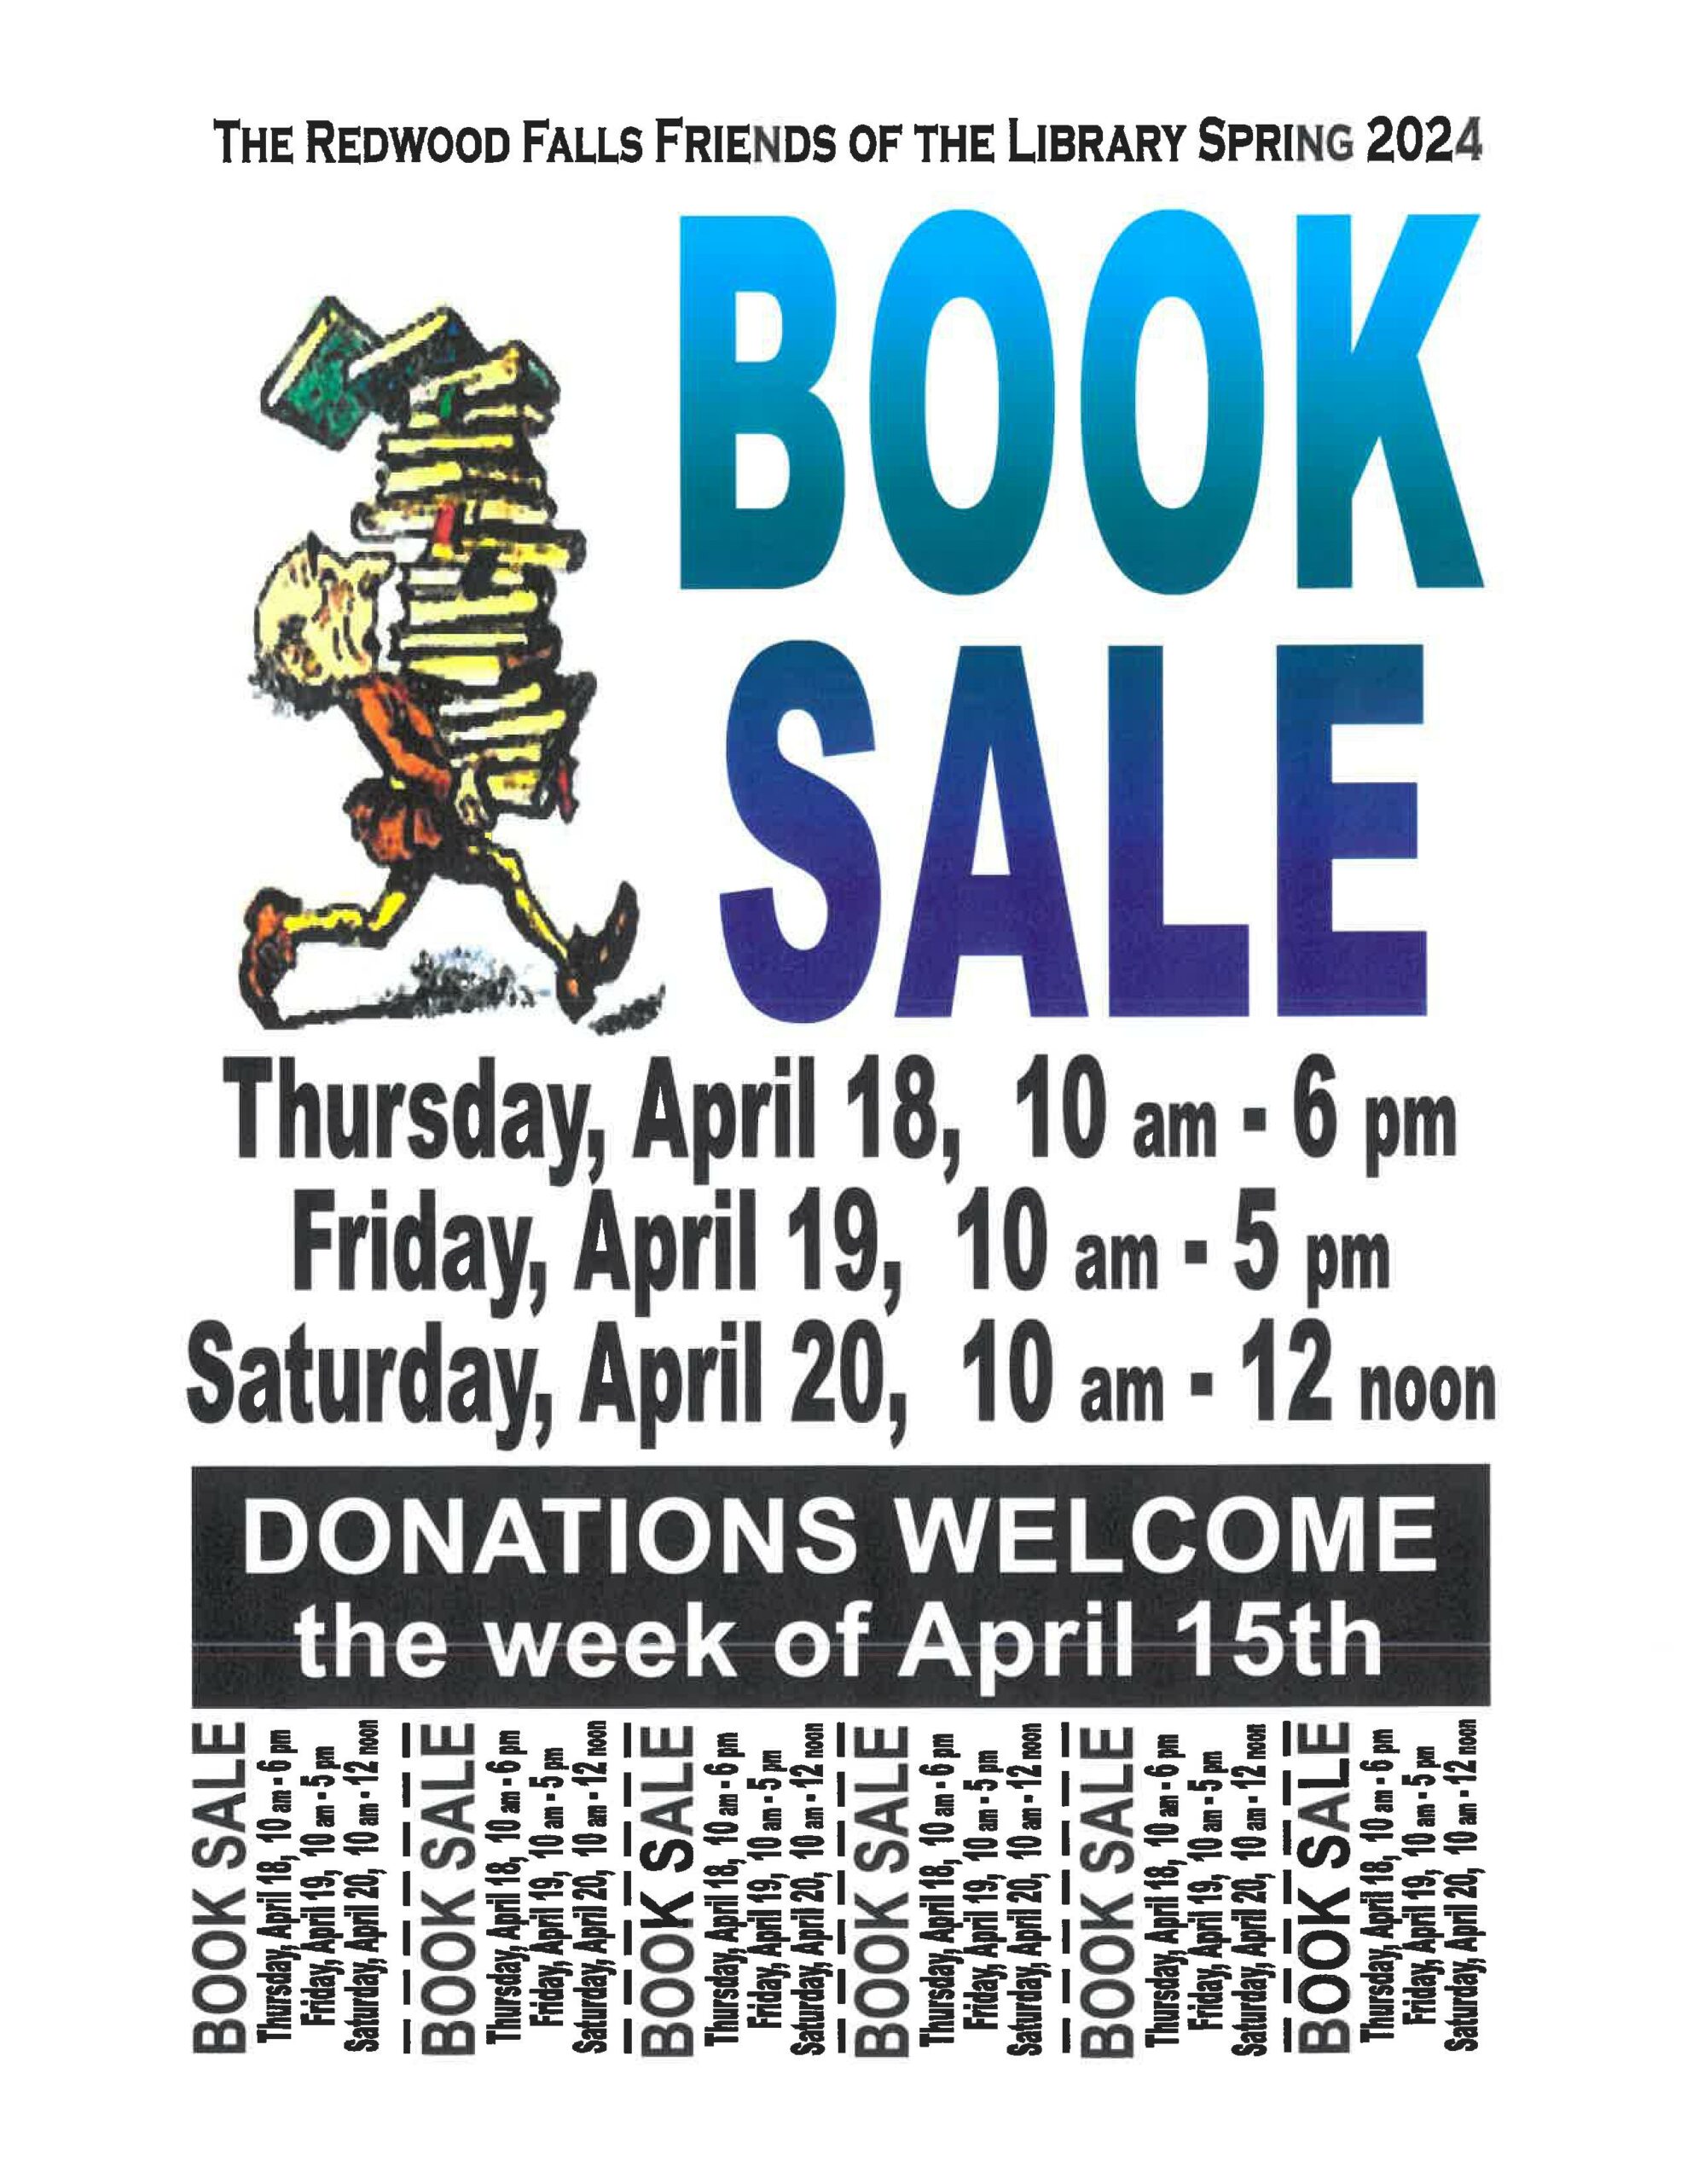 <h1 class="tribe-events-single-event-title">Friends of the Library Book Sale – Redwood Falls</h1>